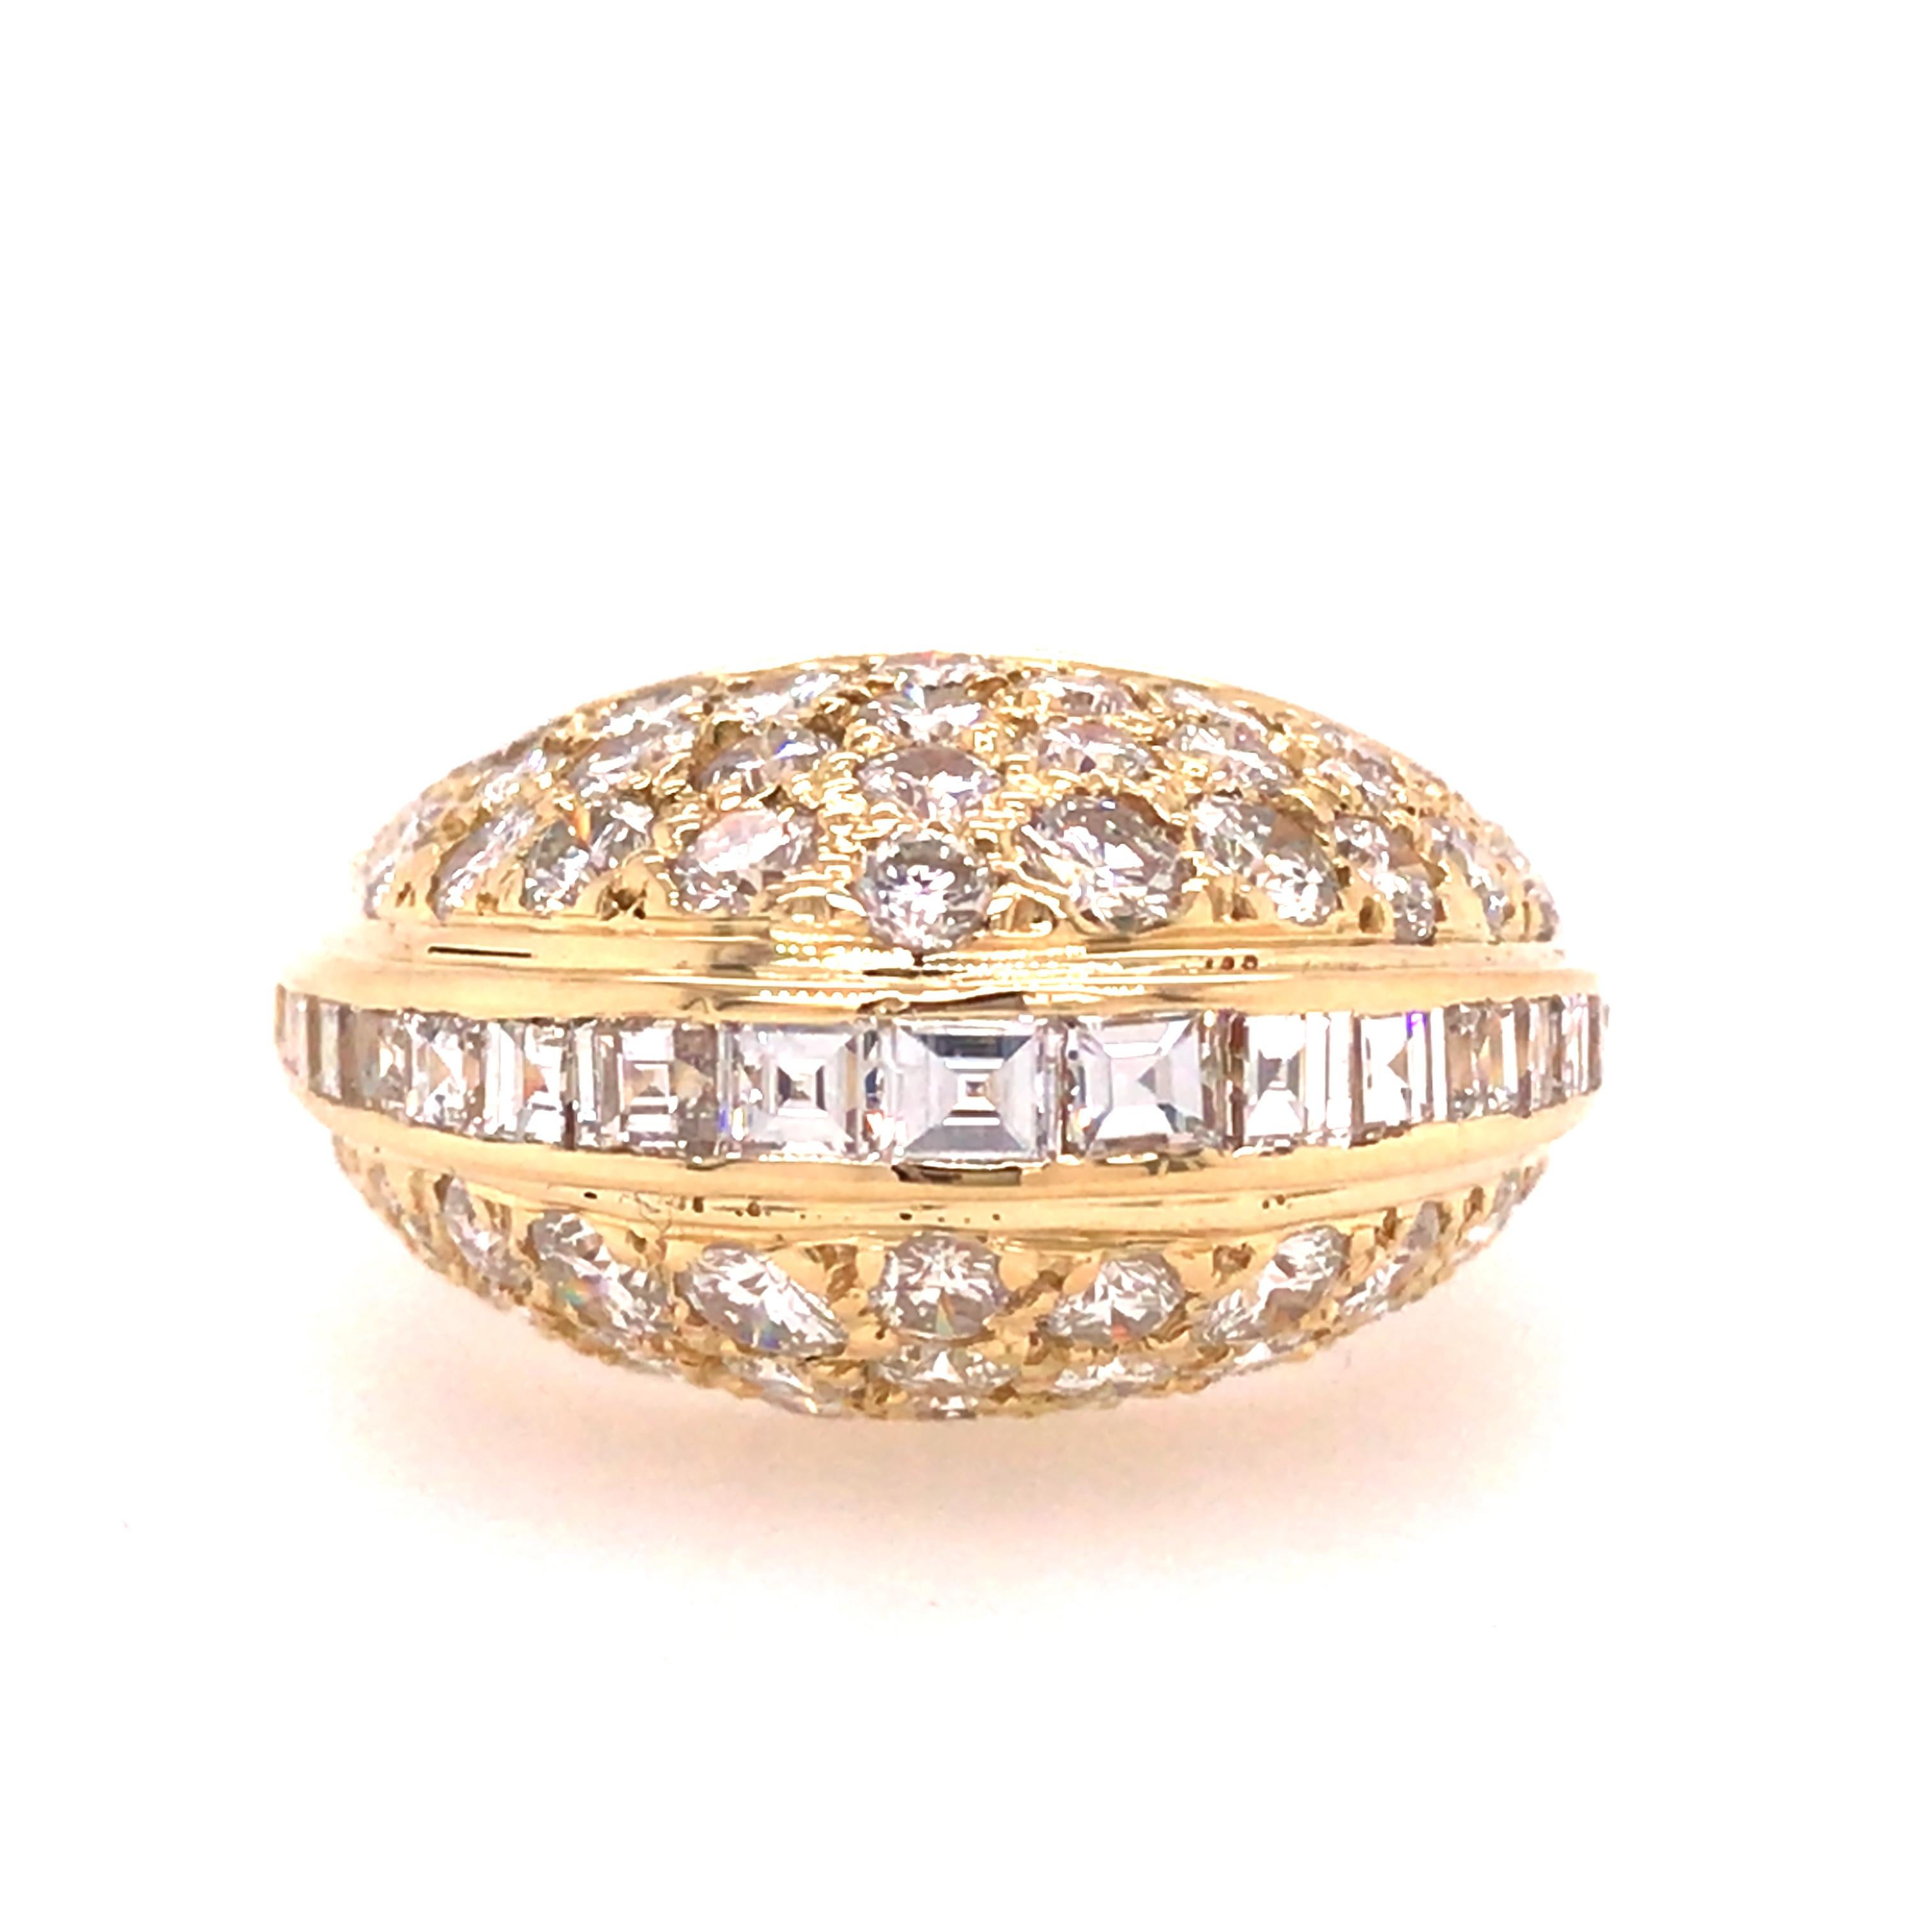 Diamond Dome Ring in 18K Yellow Gold.  Princess Cut and Round Brilliant Cut Diamonds weighing 2.50 carat total weight, G-H in color and VS in clarity are expertly set.  The Ring measures 1/2 inch in height.  Ring size 6.75. 6.84 grams.